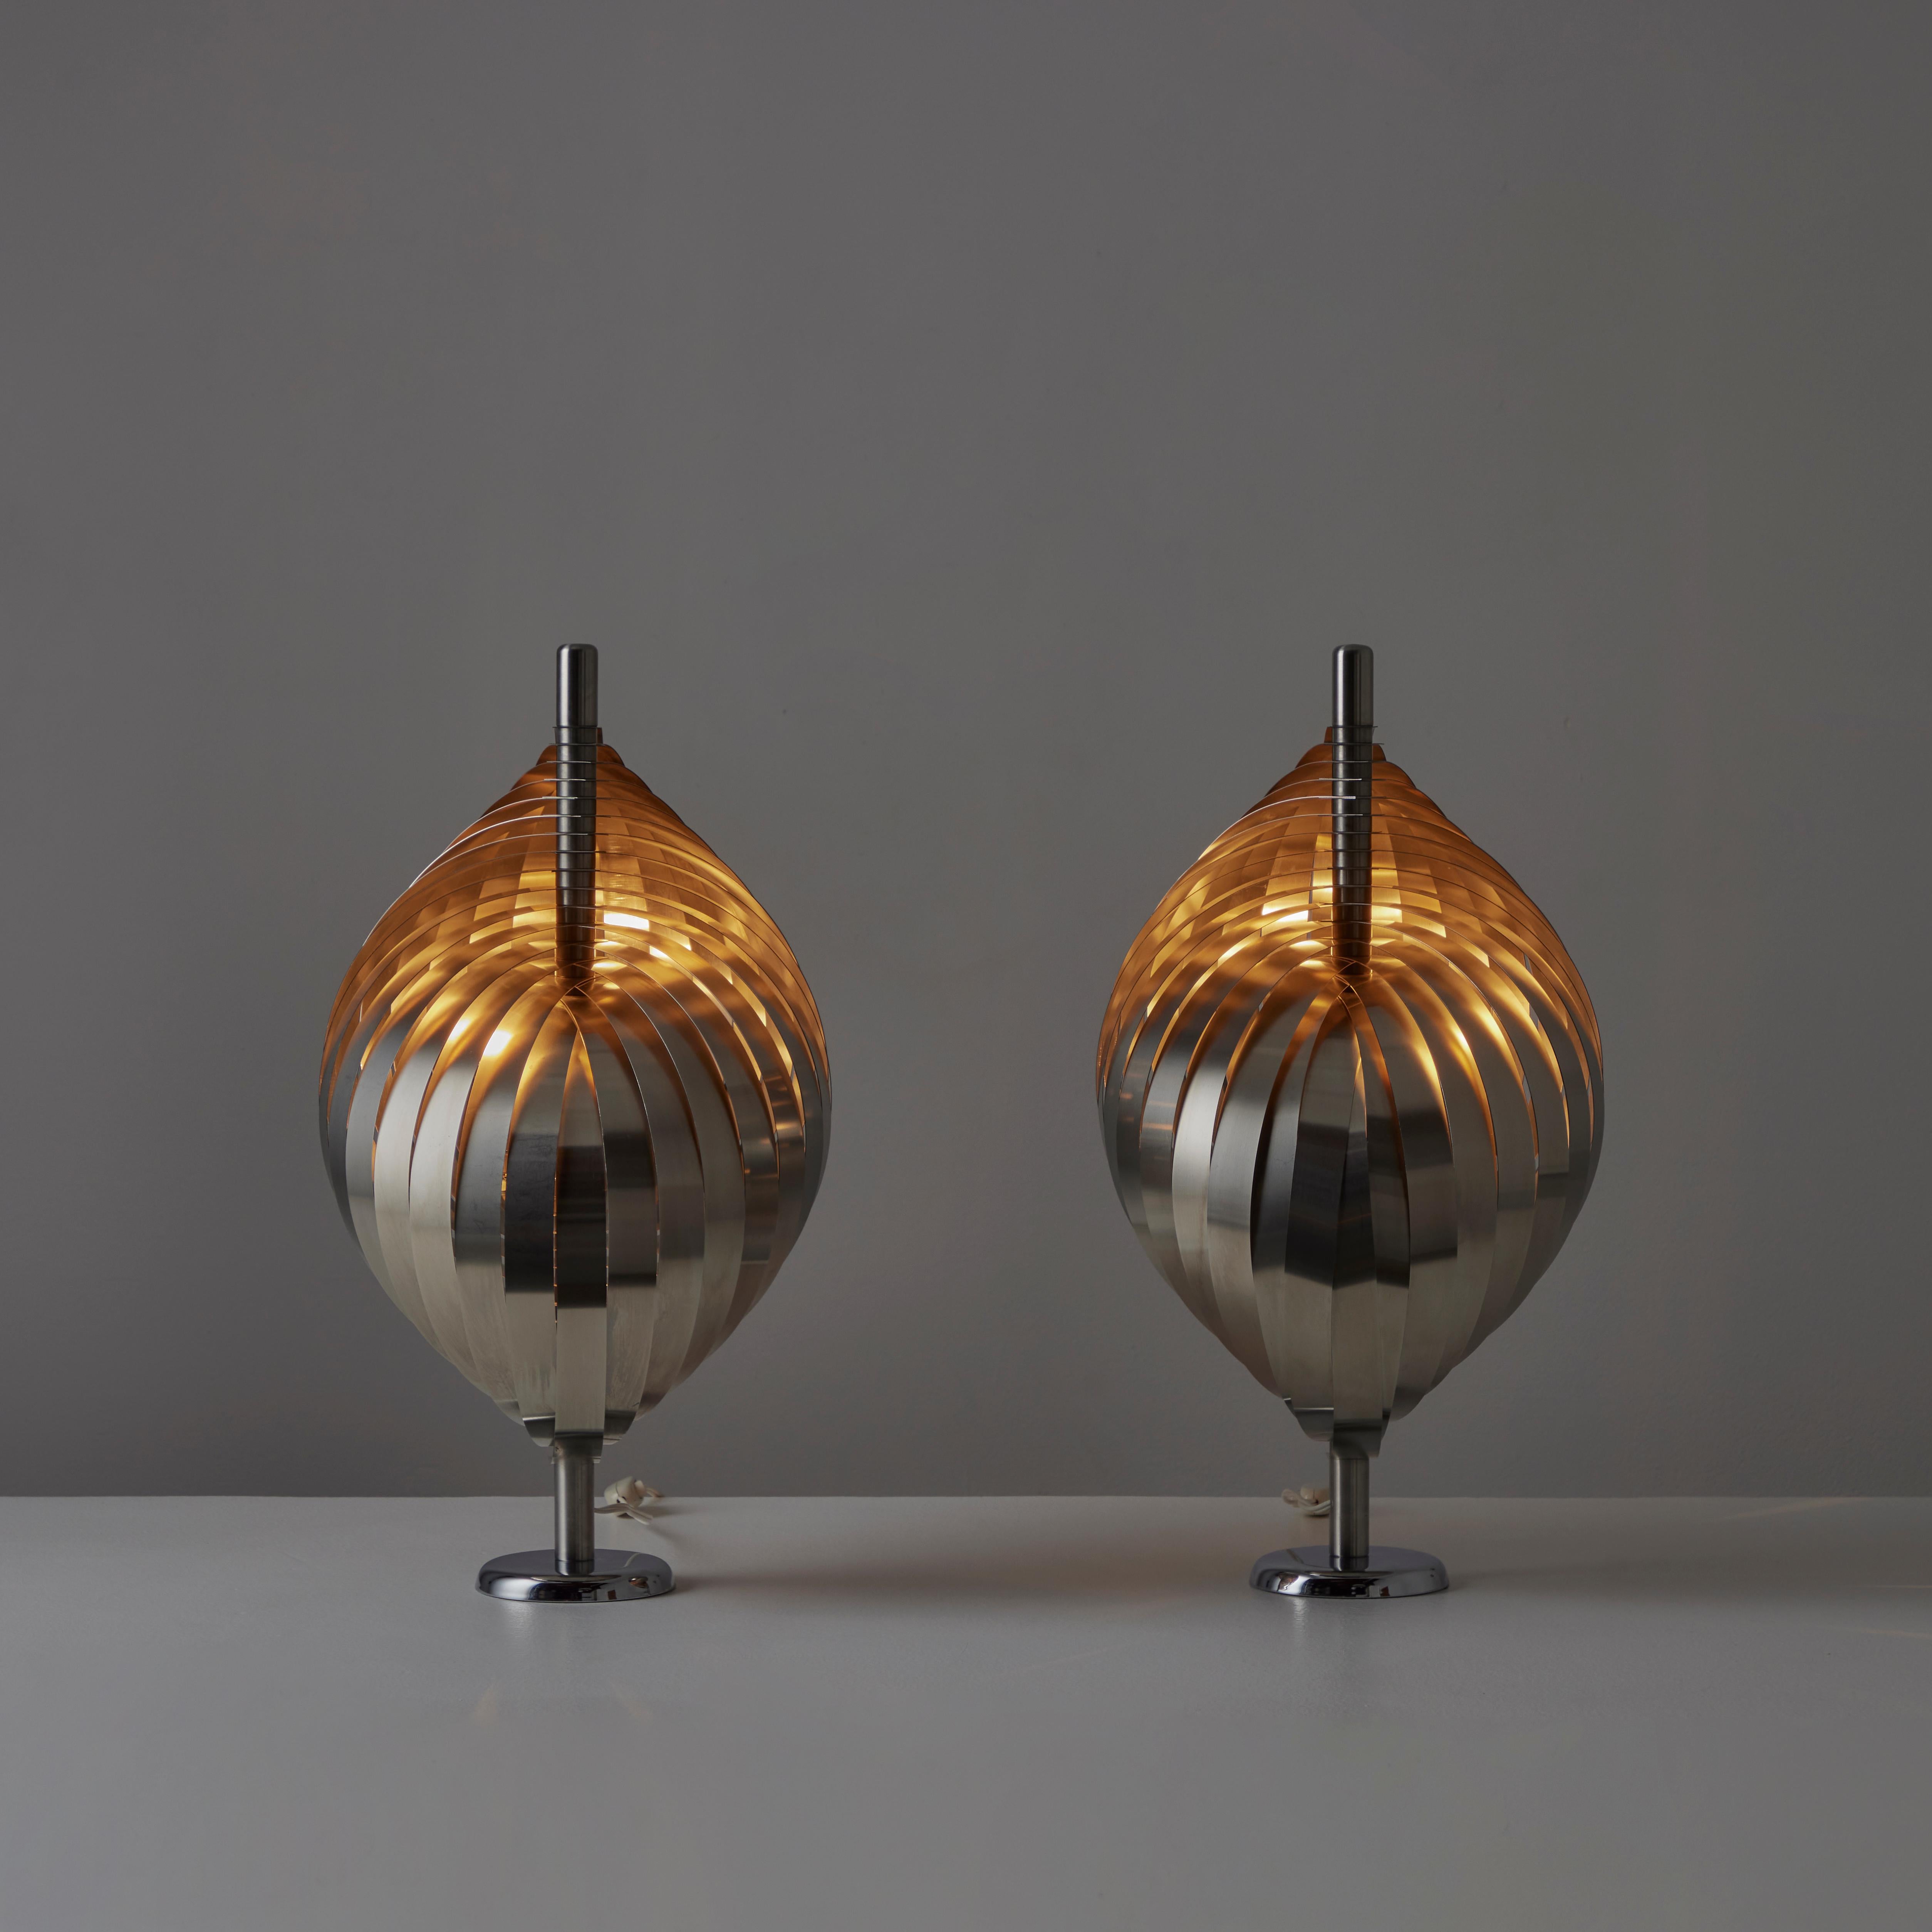 Pair of Table Lamps by Henri Mathieu. Designed and manufactured in France, circa the 1970s. Stainless steel metal ribbons spiral down a center table stem to form a striking and mysterious table. Each lap holds an E27 socket type, adapted for the US.